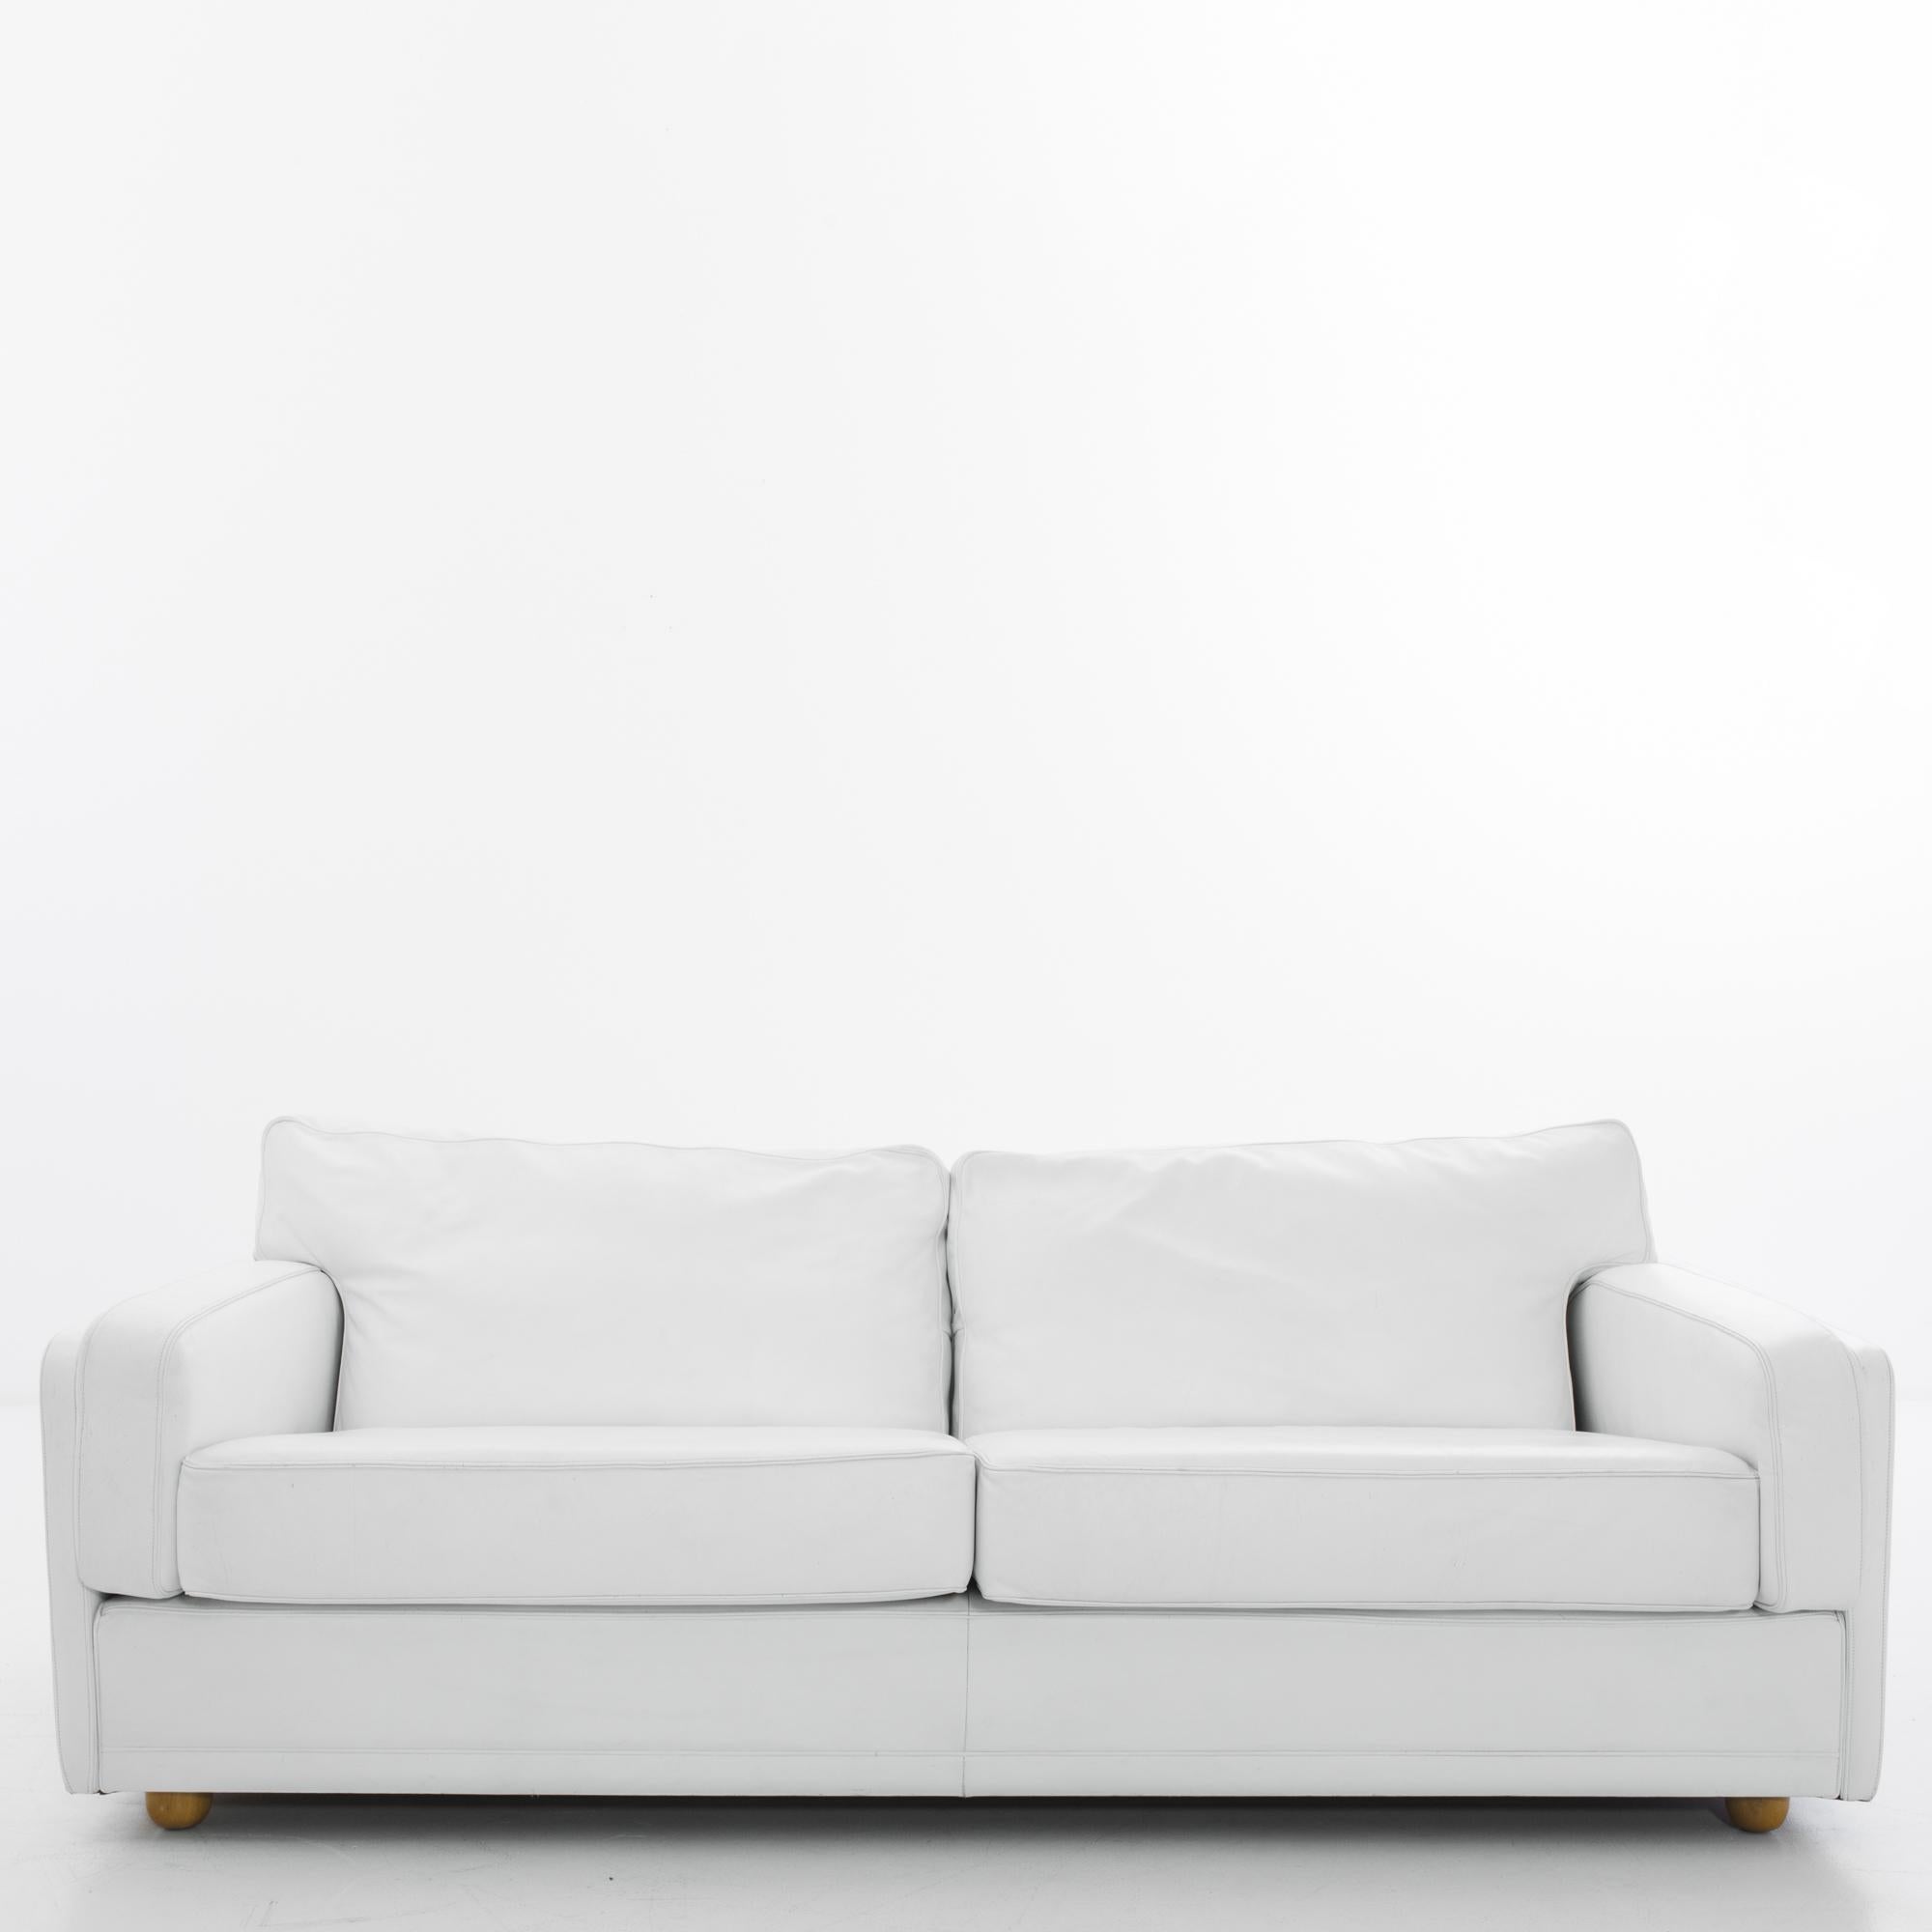 A 1980s white leather sofa from Italian furniture makers Poltrona Frau. The brilliant white of the leather brings a crisp polish to the deep-seated silhouette. Ample sofa cushions are set at a leisurely recline; wooden feet provide subtle elevation.